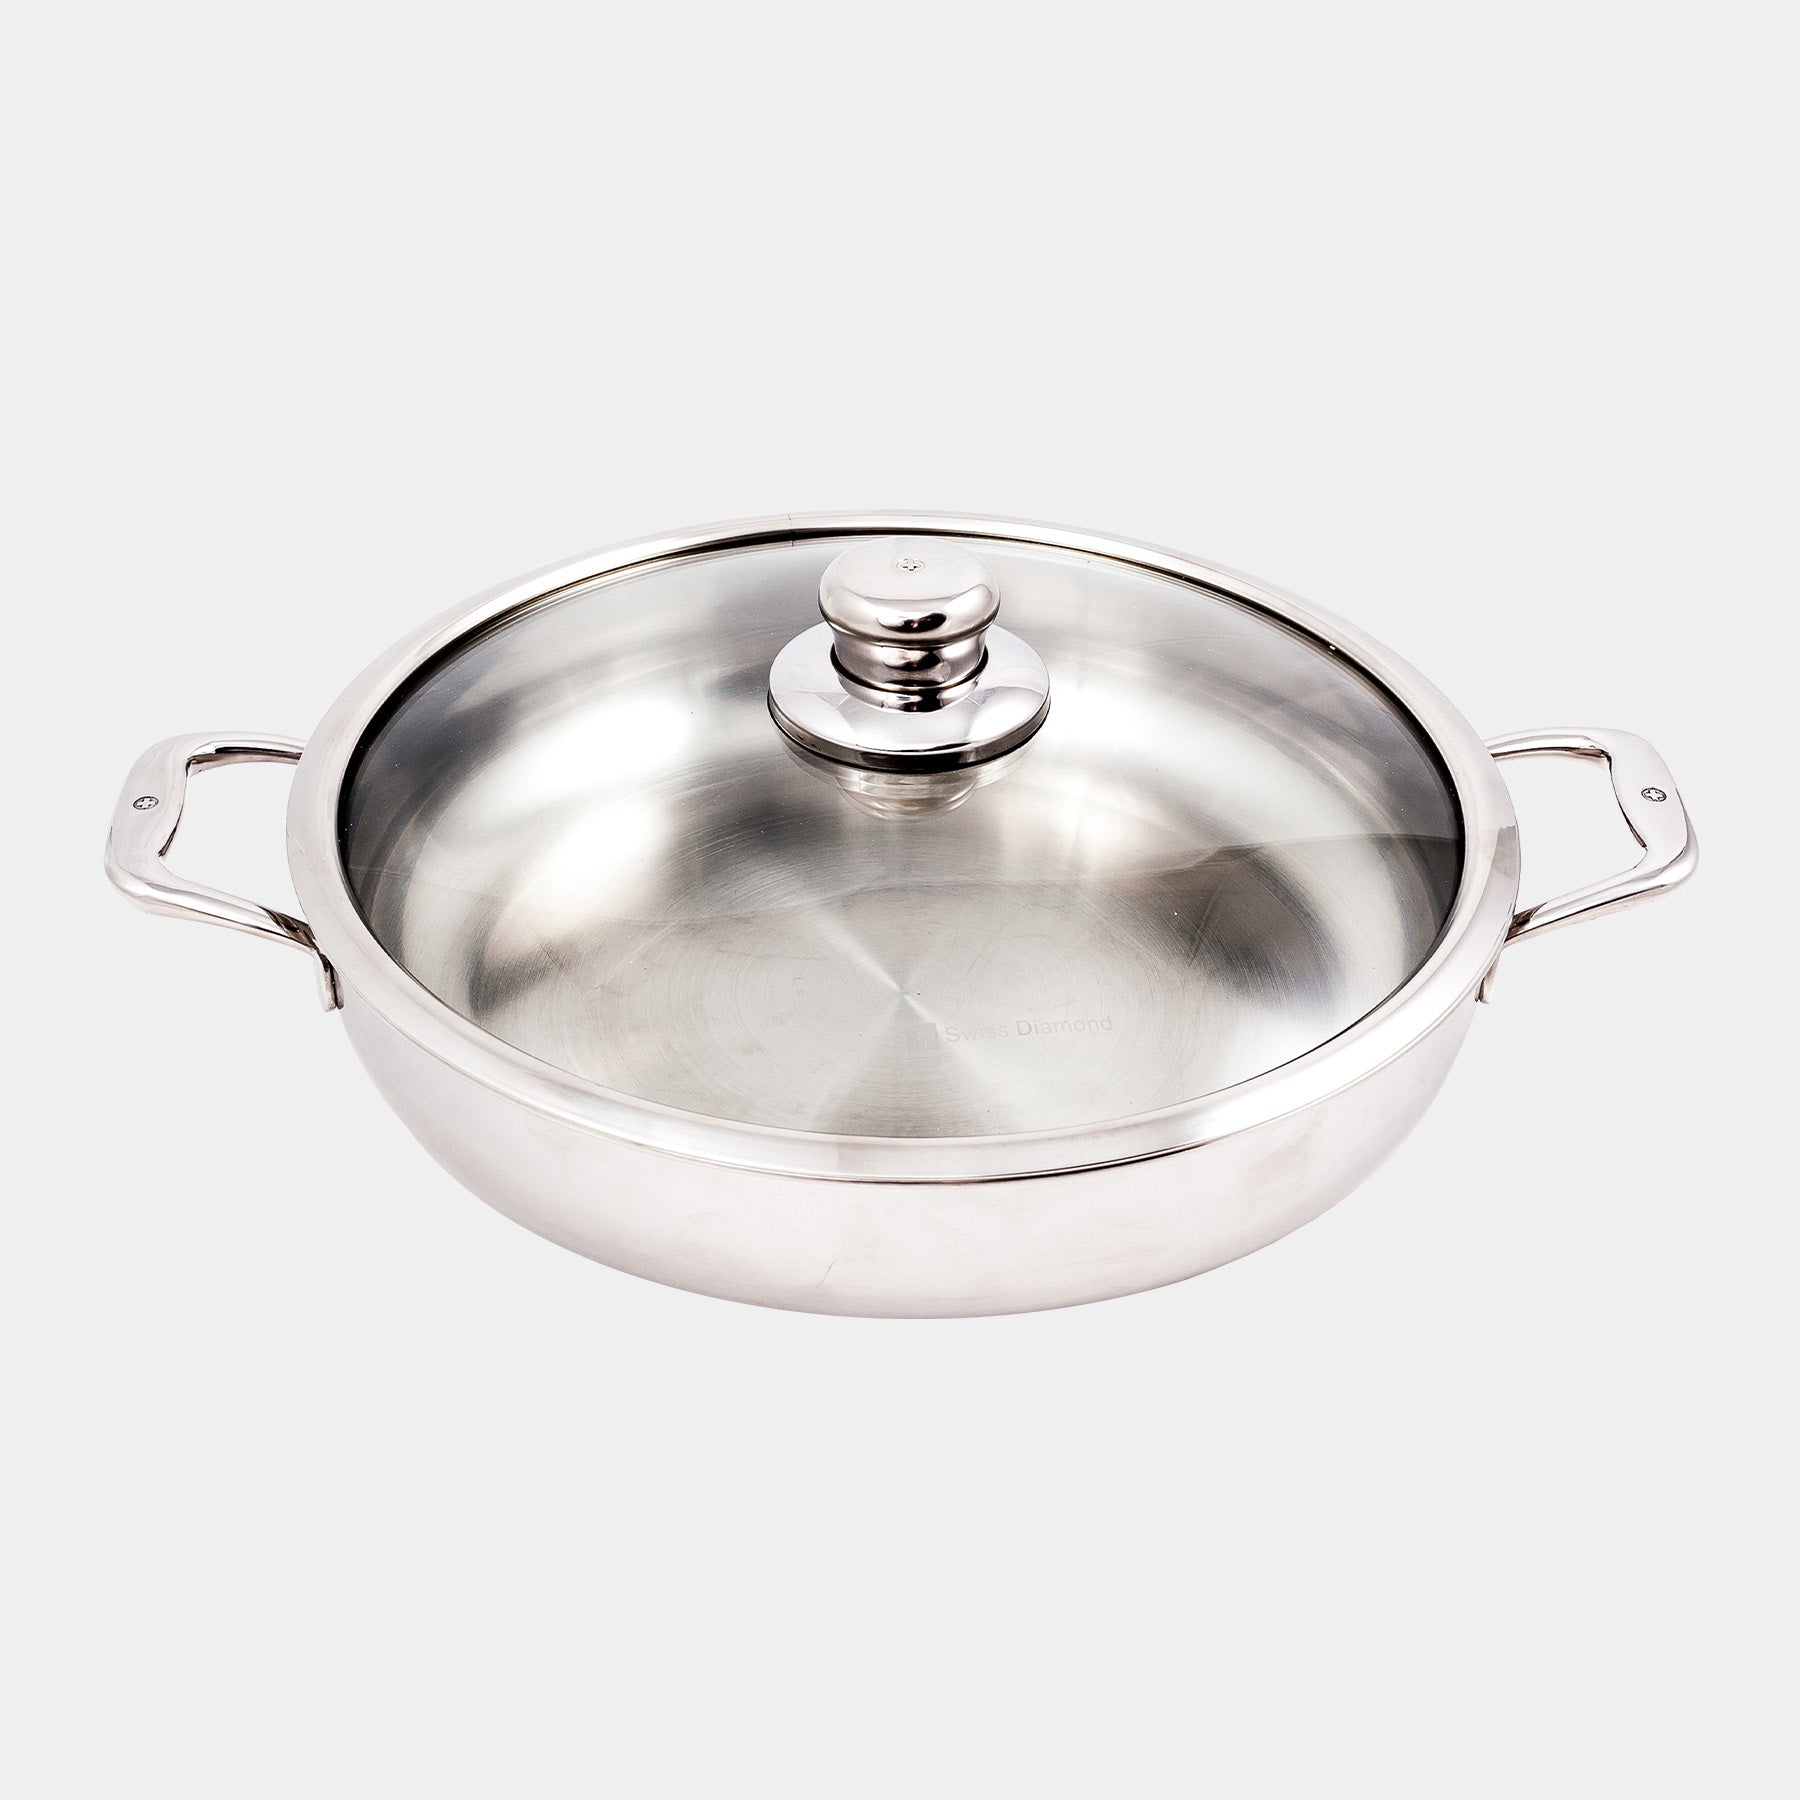 Premium Clad 5.3 qt Stainless Chef's Pan with Glass Lid - Induction